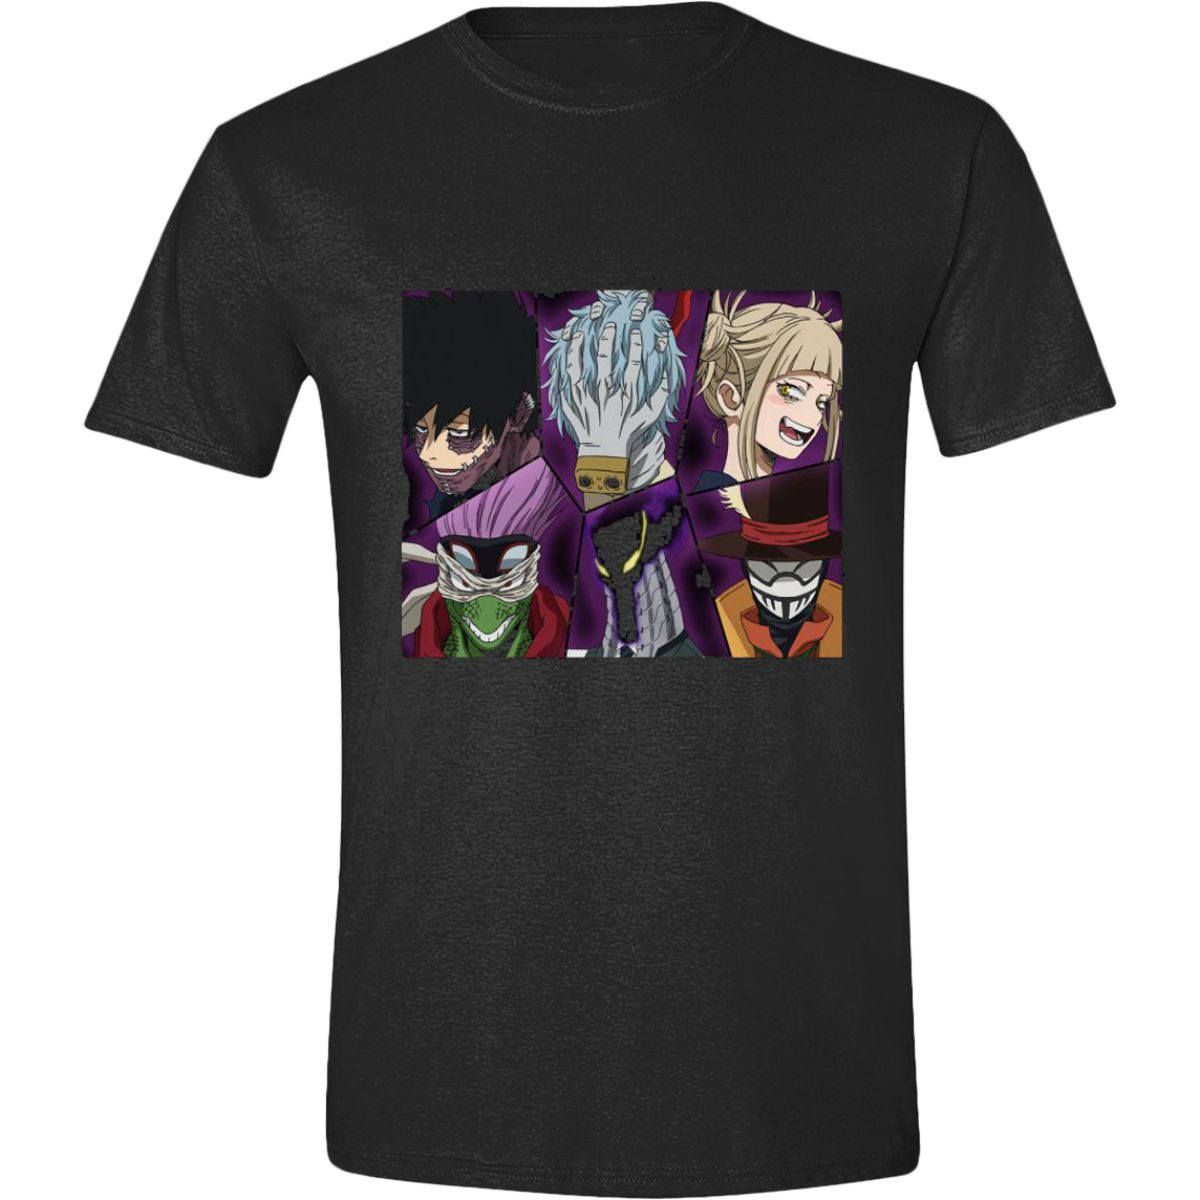 My Hero Academia T-Shirt Group Faces Size XL PCMerch